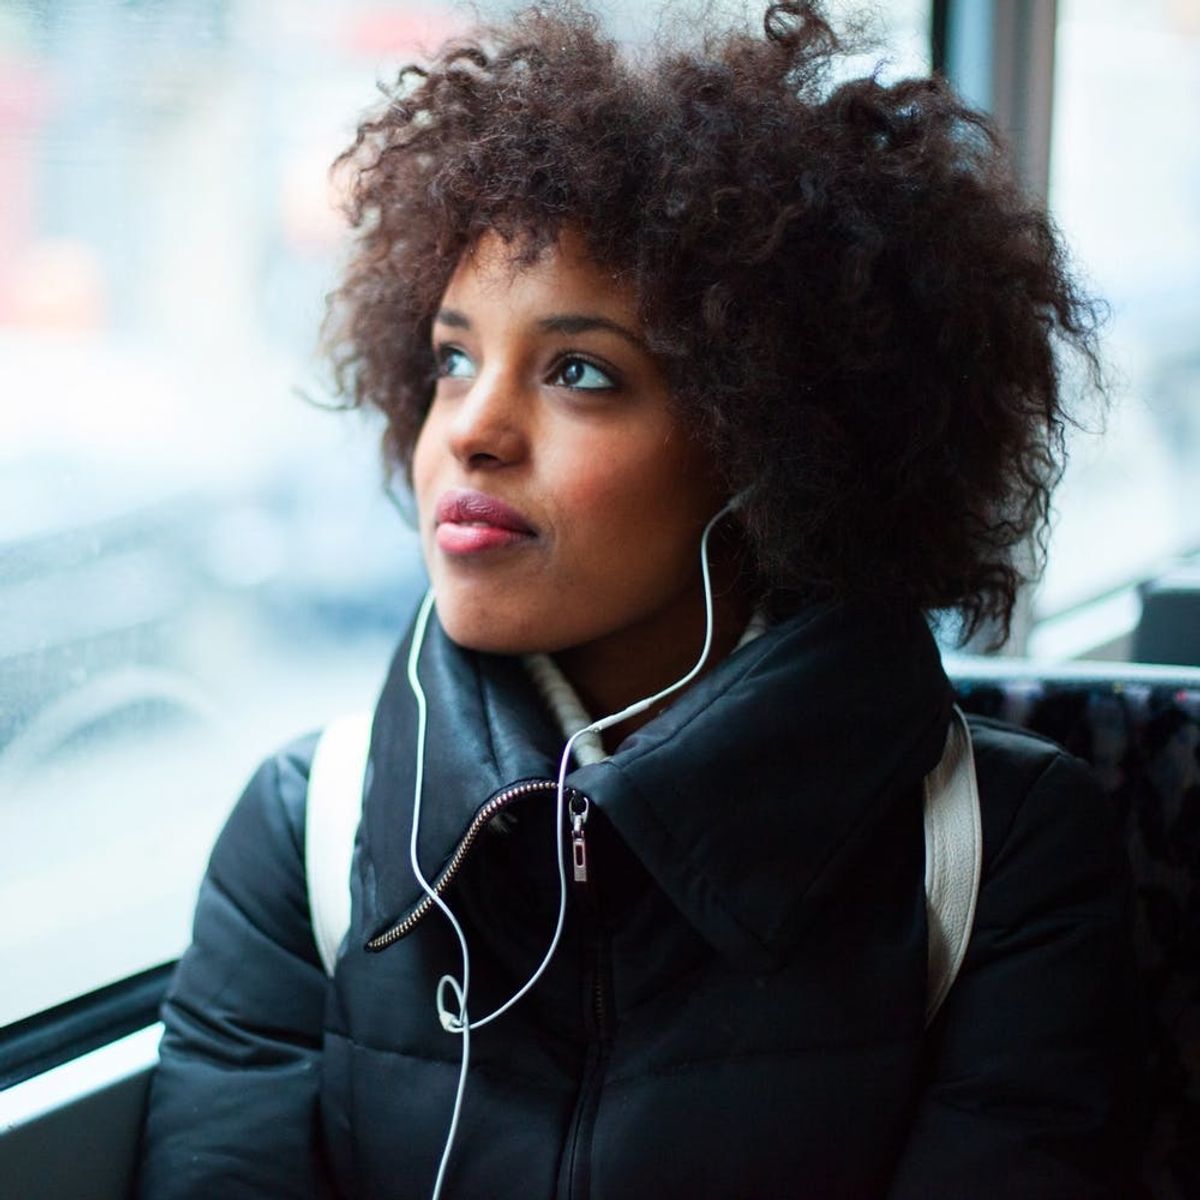 You’re Not the Only One That Listens to Sad Love Songs on Rainy Days, Says Spotify